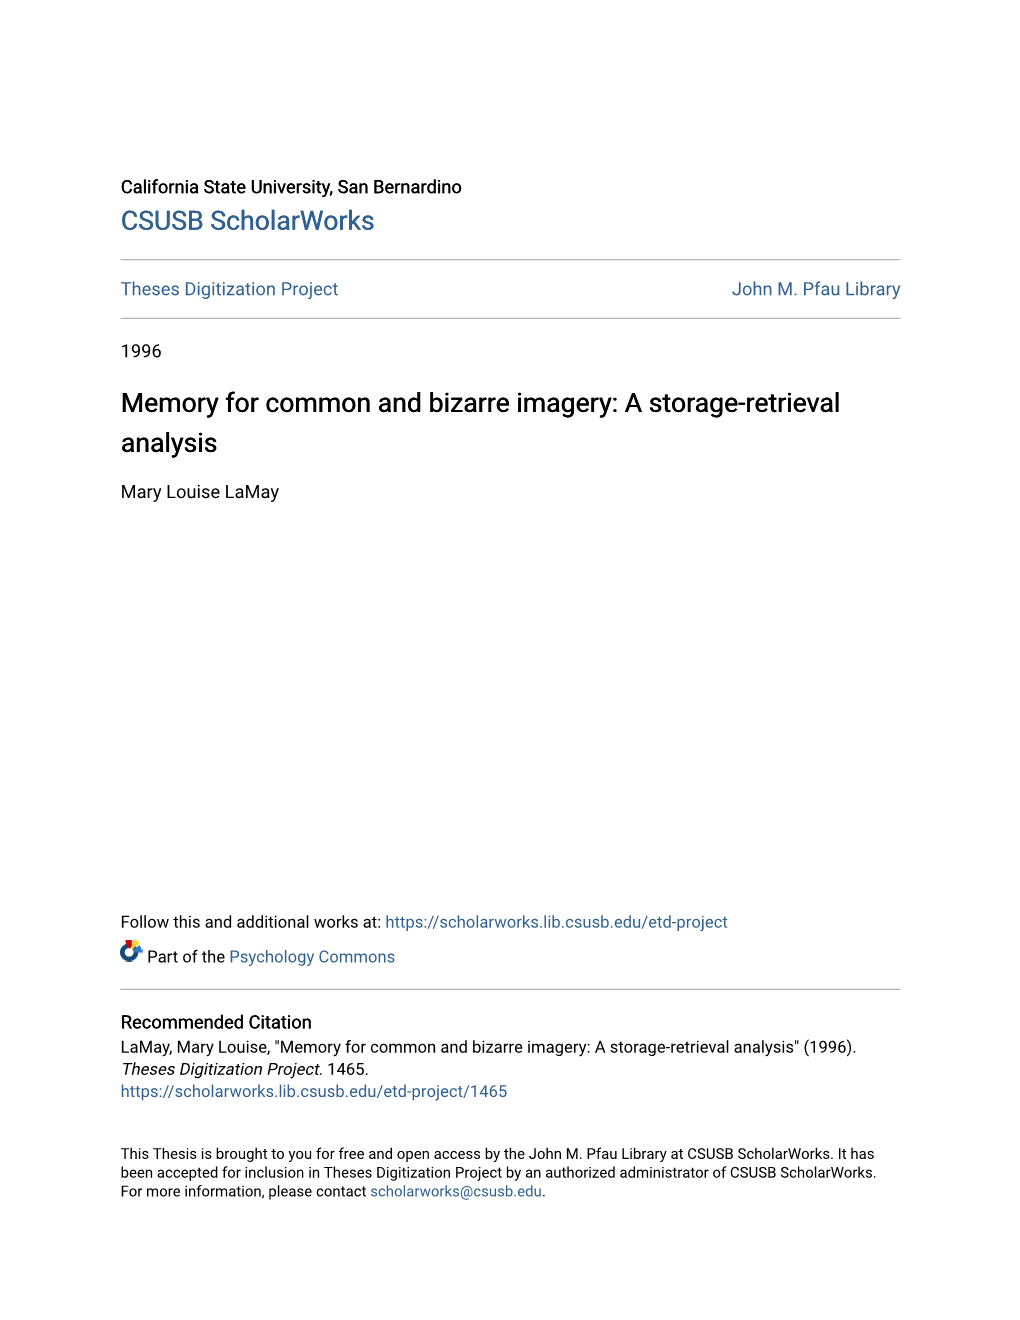 Memory for Common and Bizarre Imagery: a Storage-Retrieval Analysis